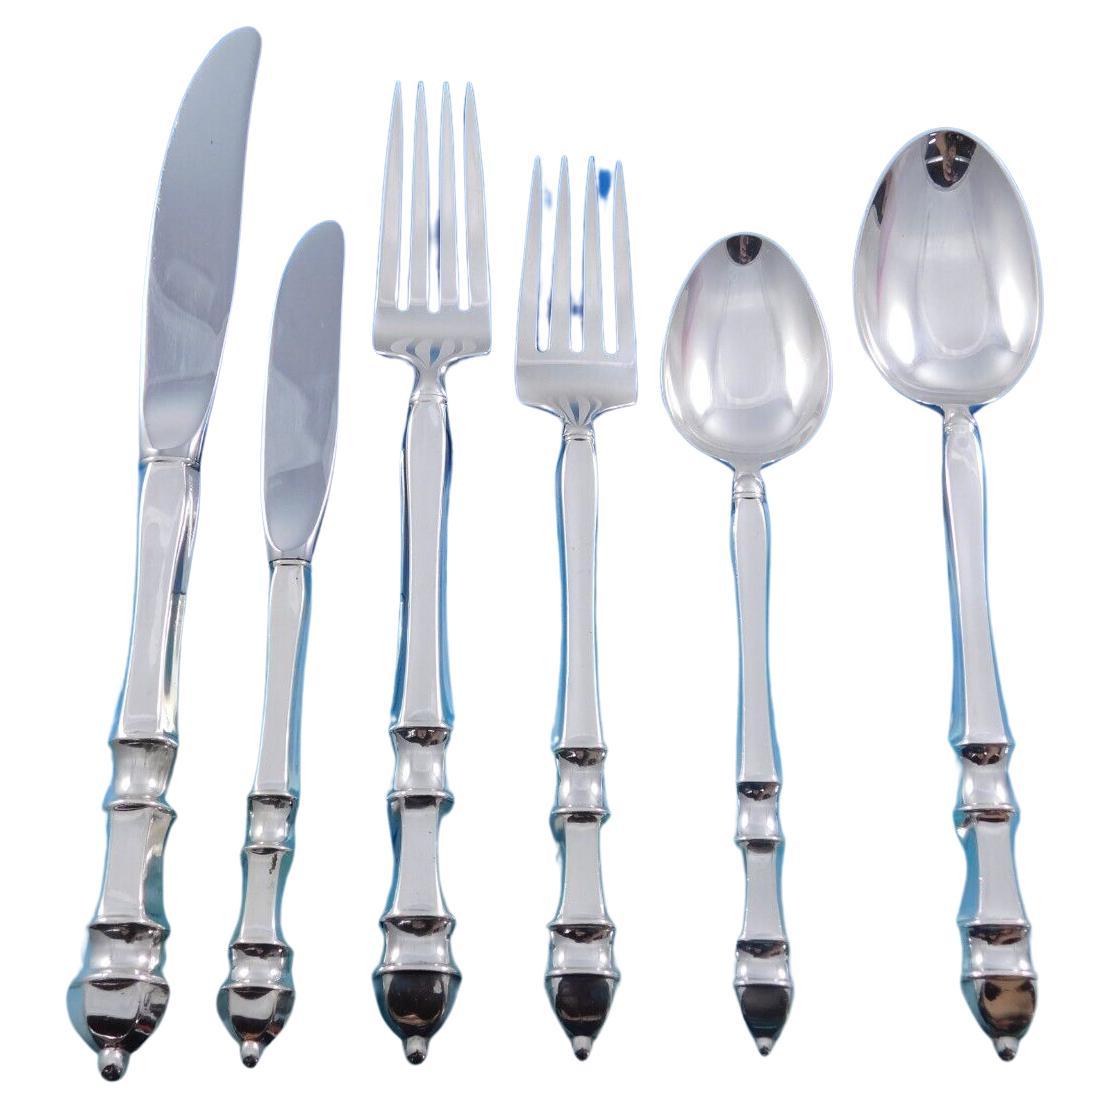 Carpenter Hall by Towle Sterling Silver Flatware Set for 12 Service 79 pieces